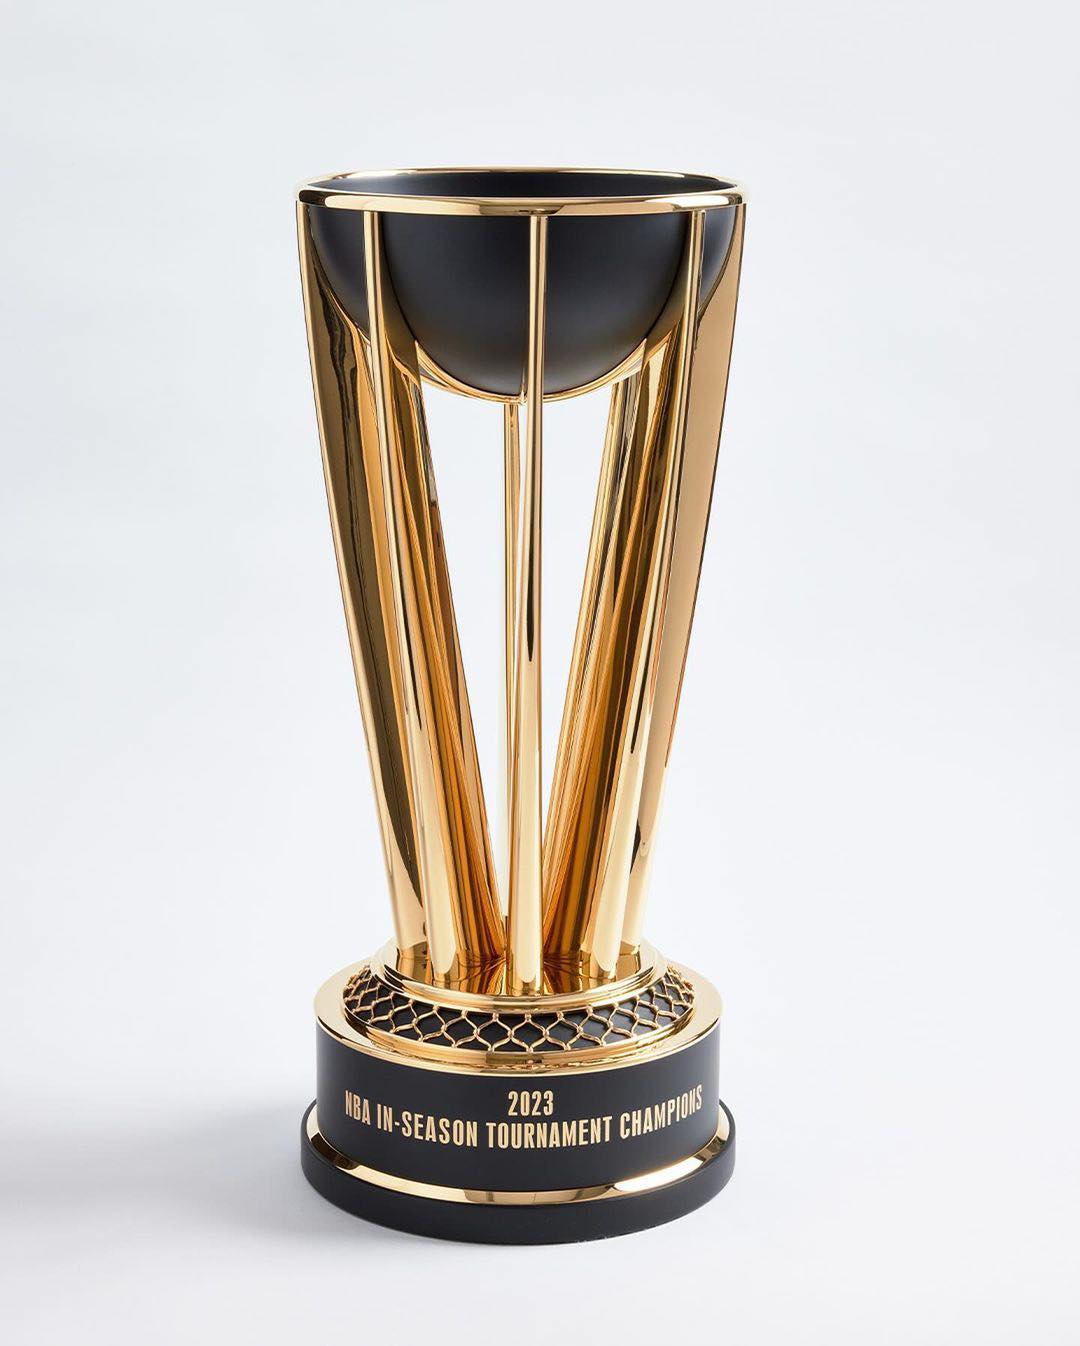 The trophy that Pacers or Lakers will win